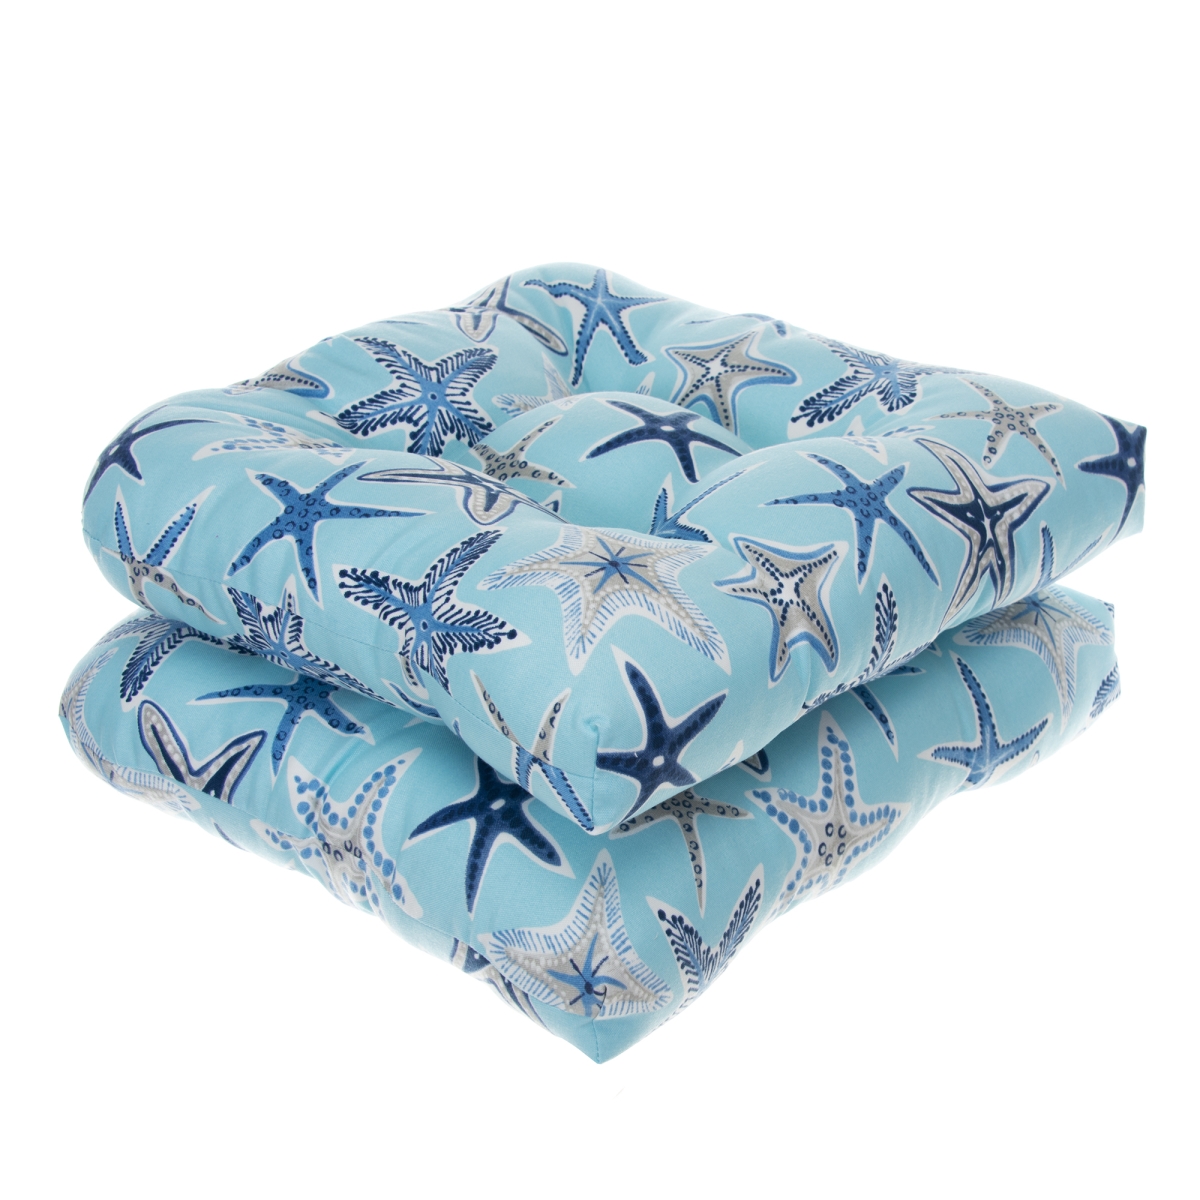 70134 Reach For The Stars Indoor & Outdoor Reversible Wicker Chair Cushion, Blue - Pack Of 2